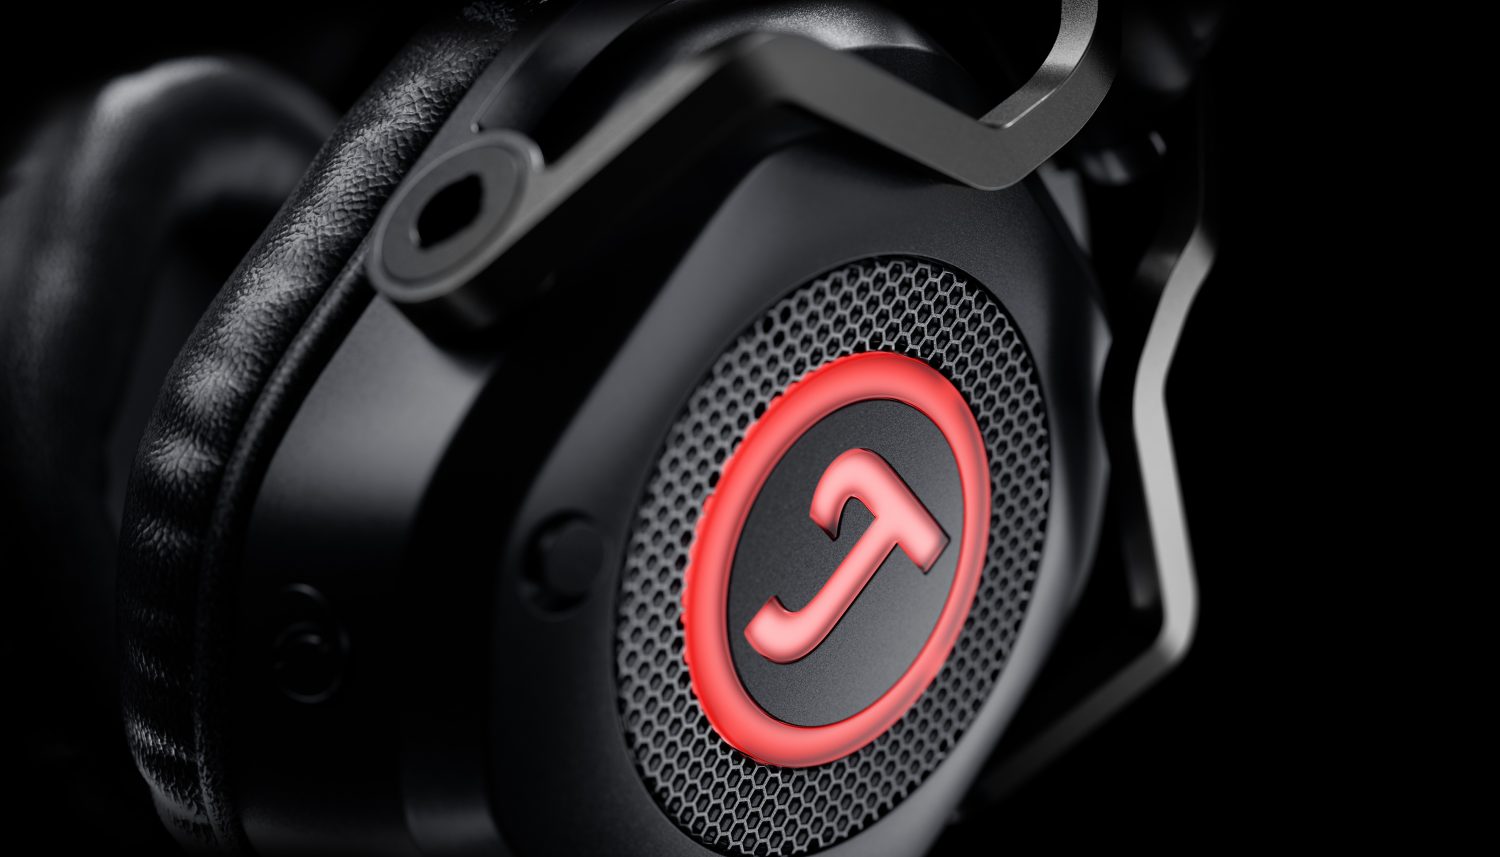 TEUFEL CAGE Gaming-Headset